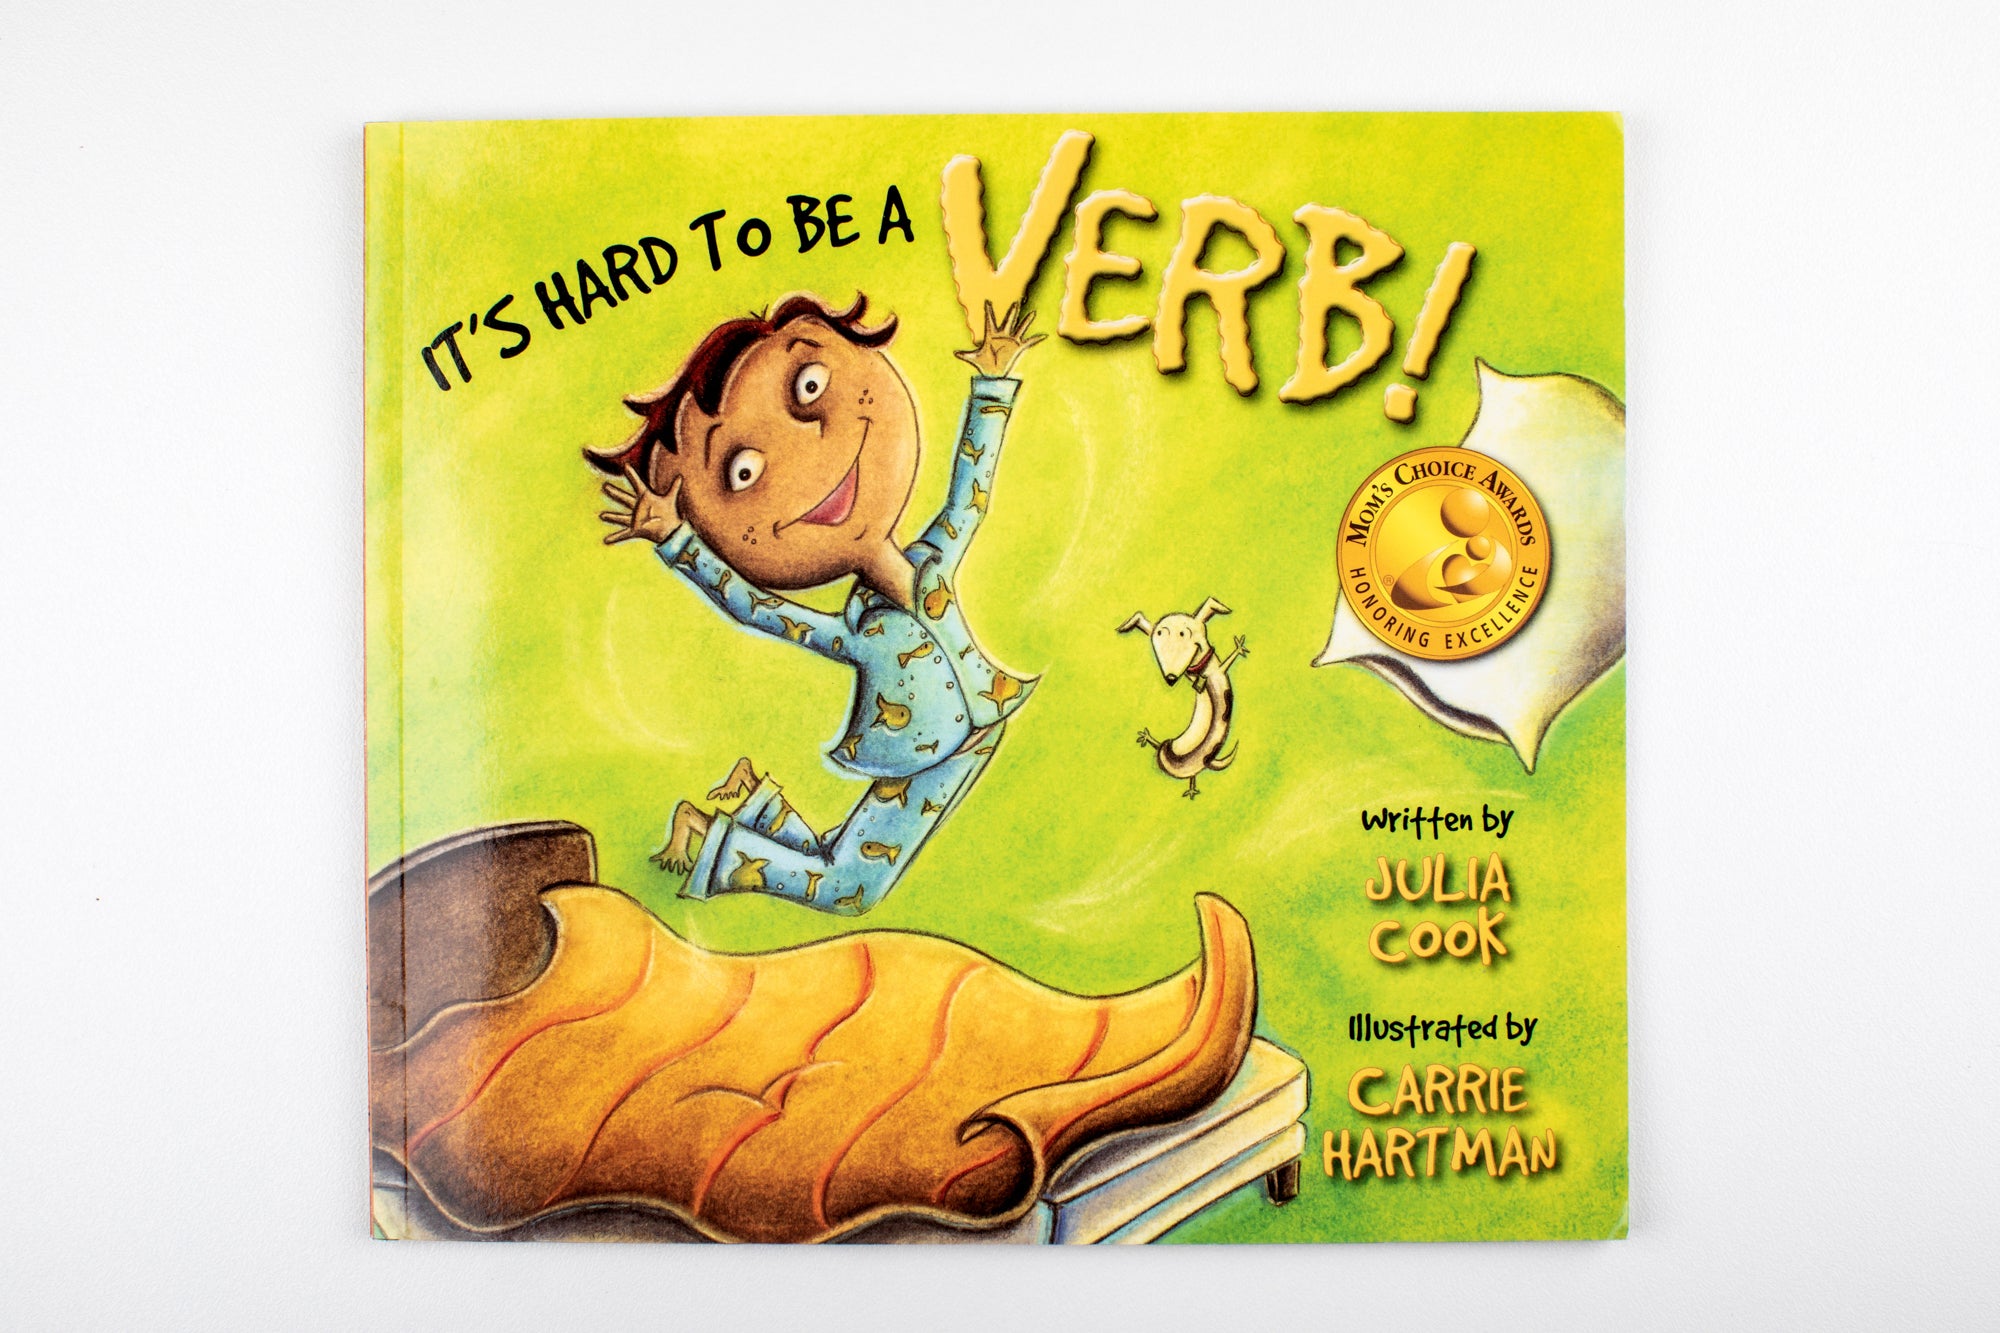 SALE - Book Julia Cook - It's Hard to be a Verb Image